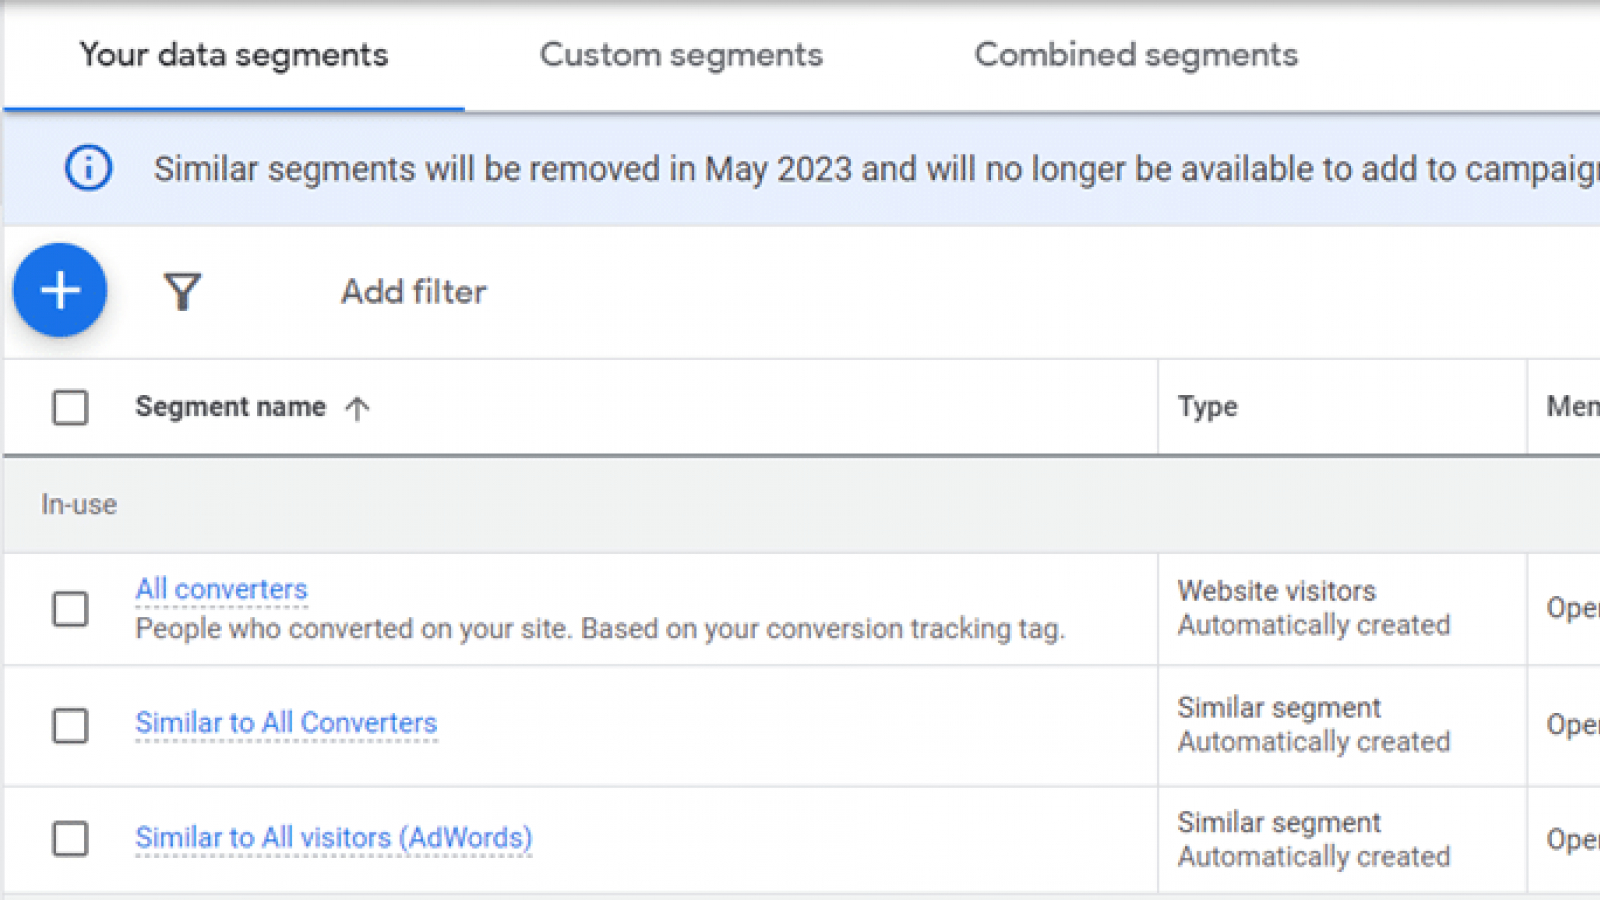 How to transition away from Google Ads similar audience segments